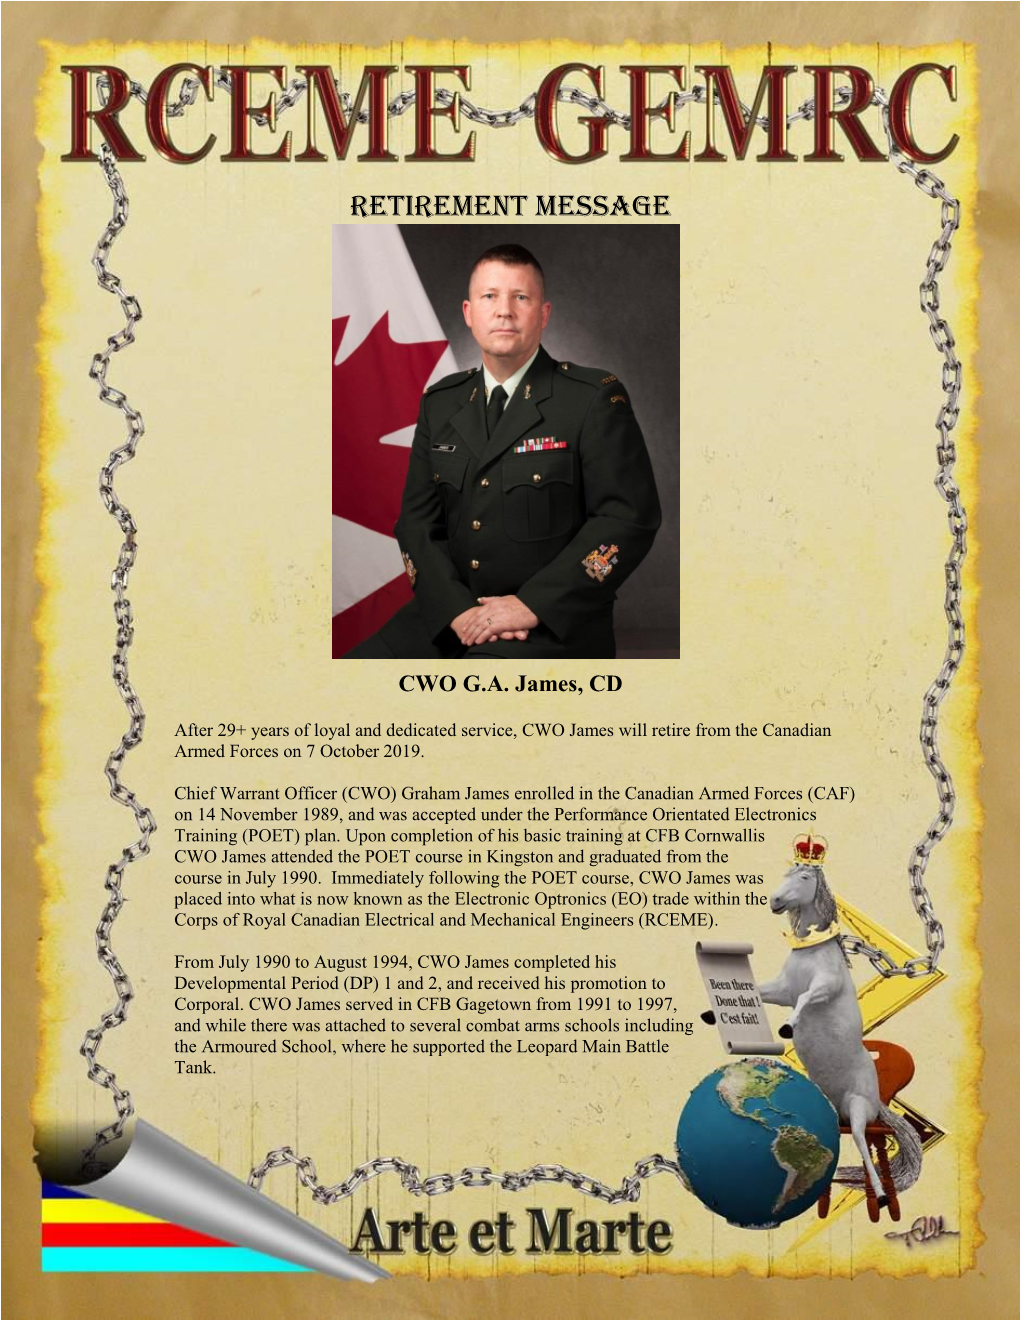 CWO James Will Retire from the Canadian Armed Forces on 7 October 2019